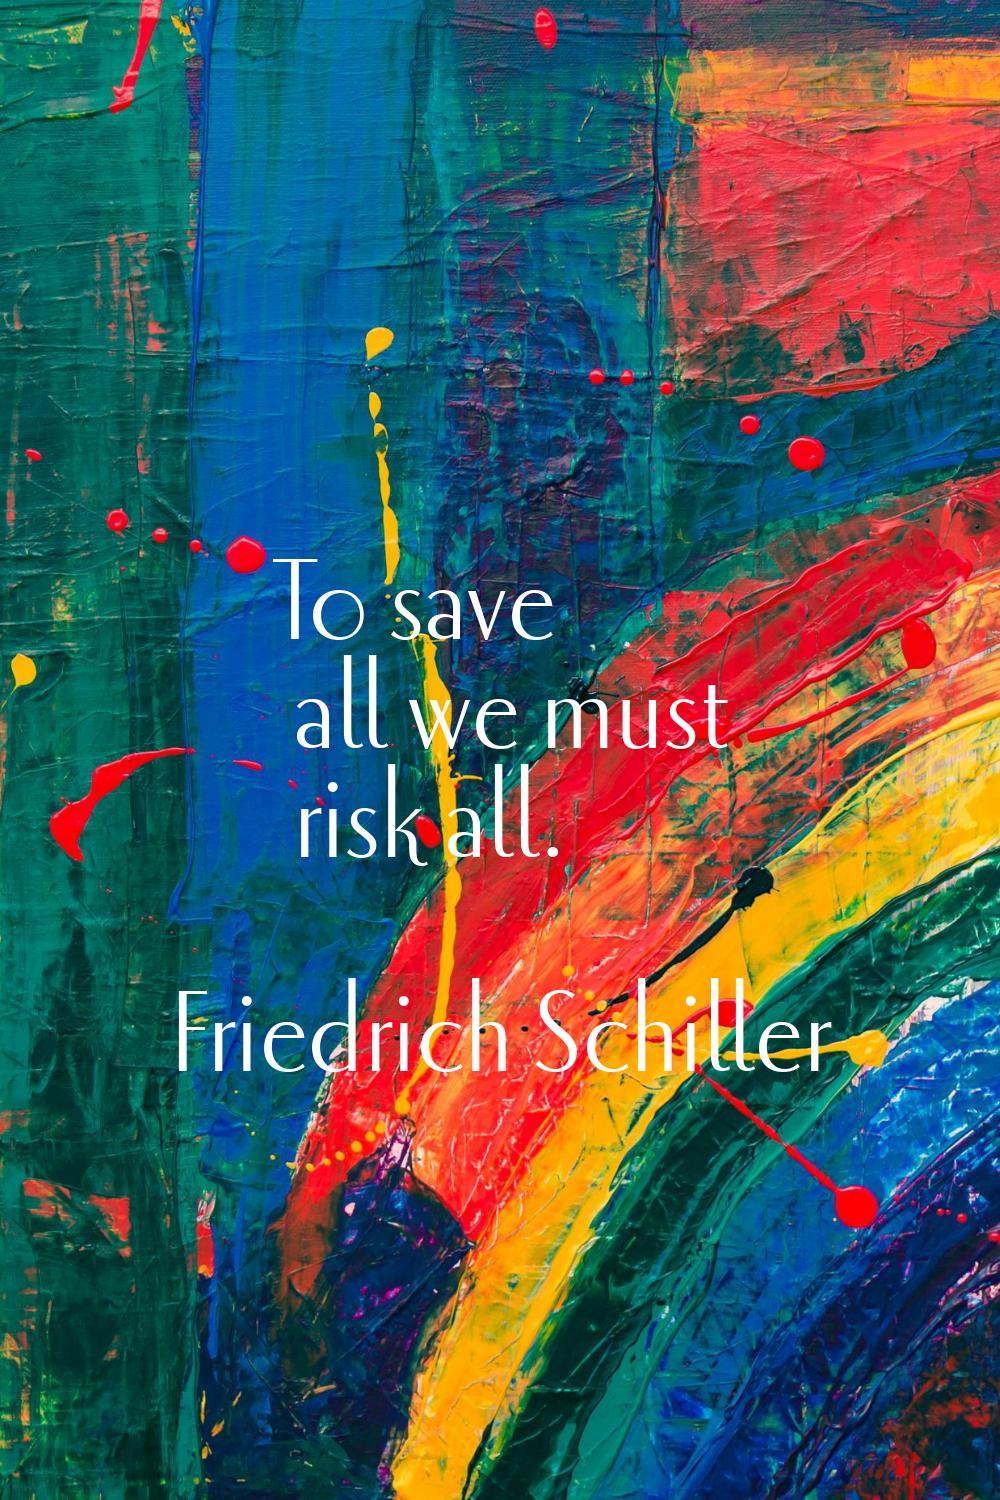 To save all we must risk all.